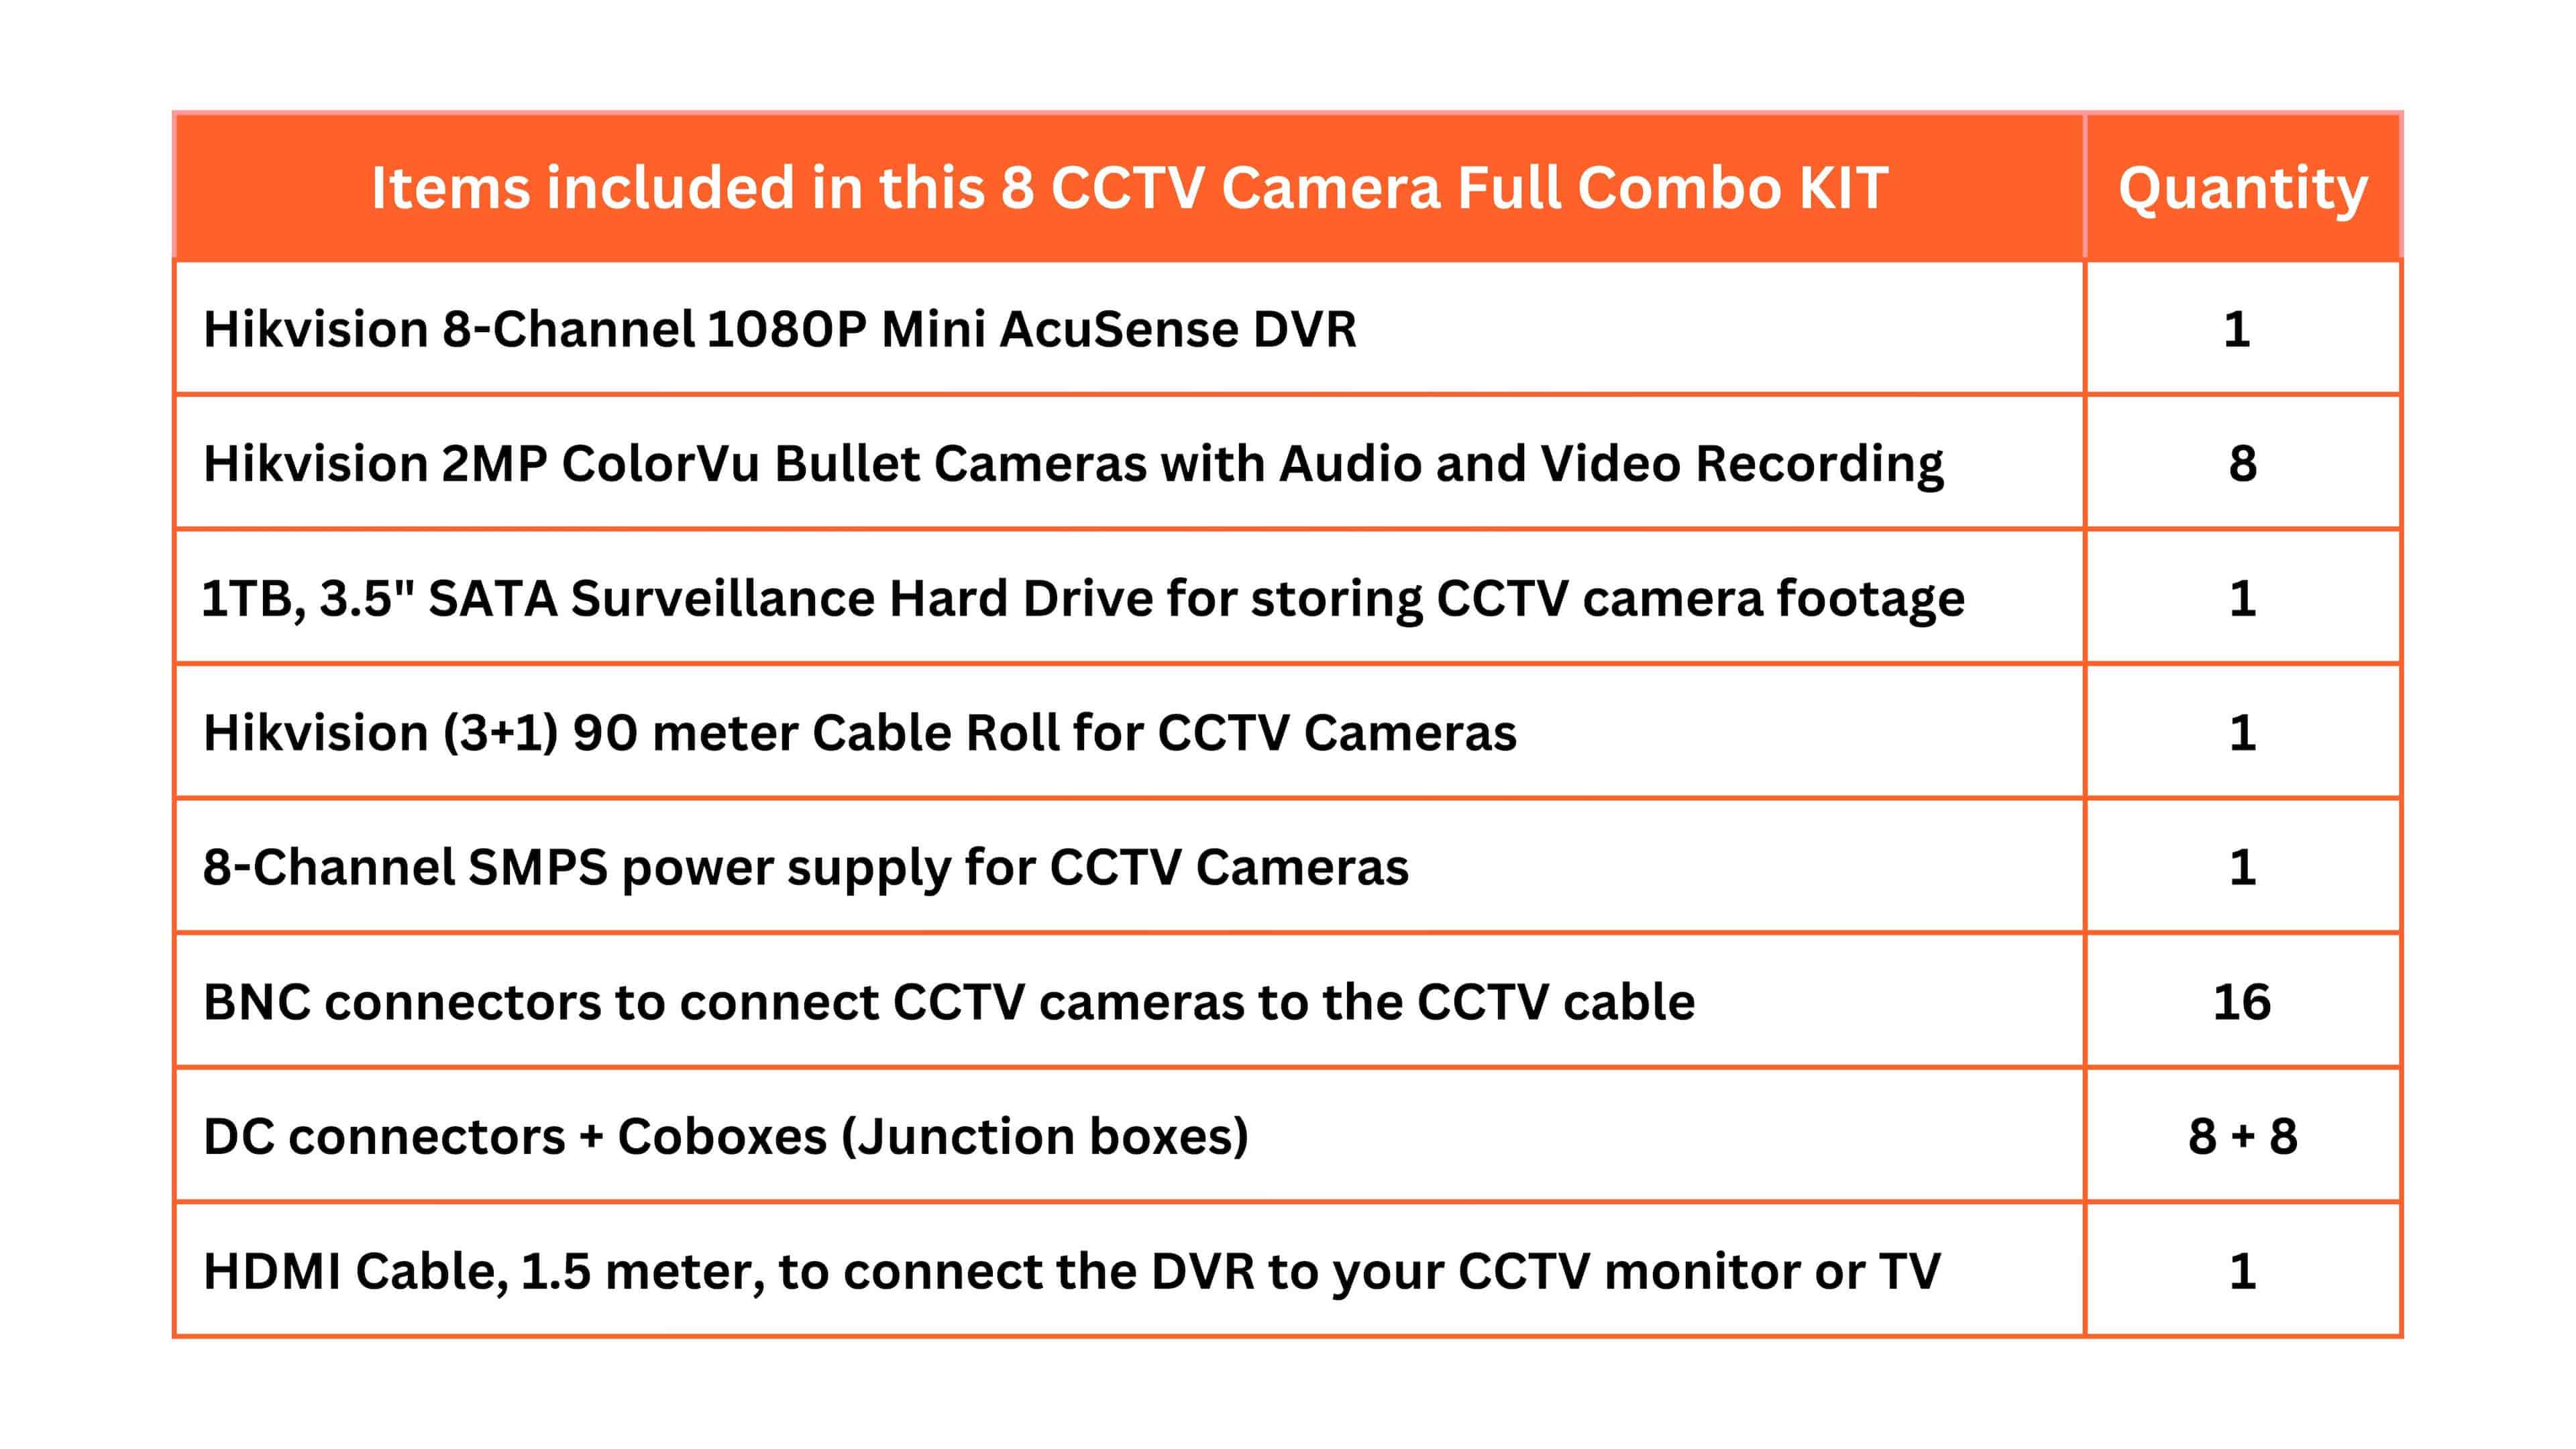 HIKVISION 8 CCTV Camera Full Set with 8 Channel 1080P DVR, 8x 2MP ColorVu Bullet Cameras, 1TB HDD, Cable Roll, 8CH Power Supply, BNC, DC, Cobox & HDMI